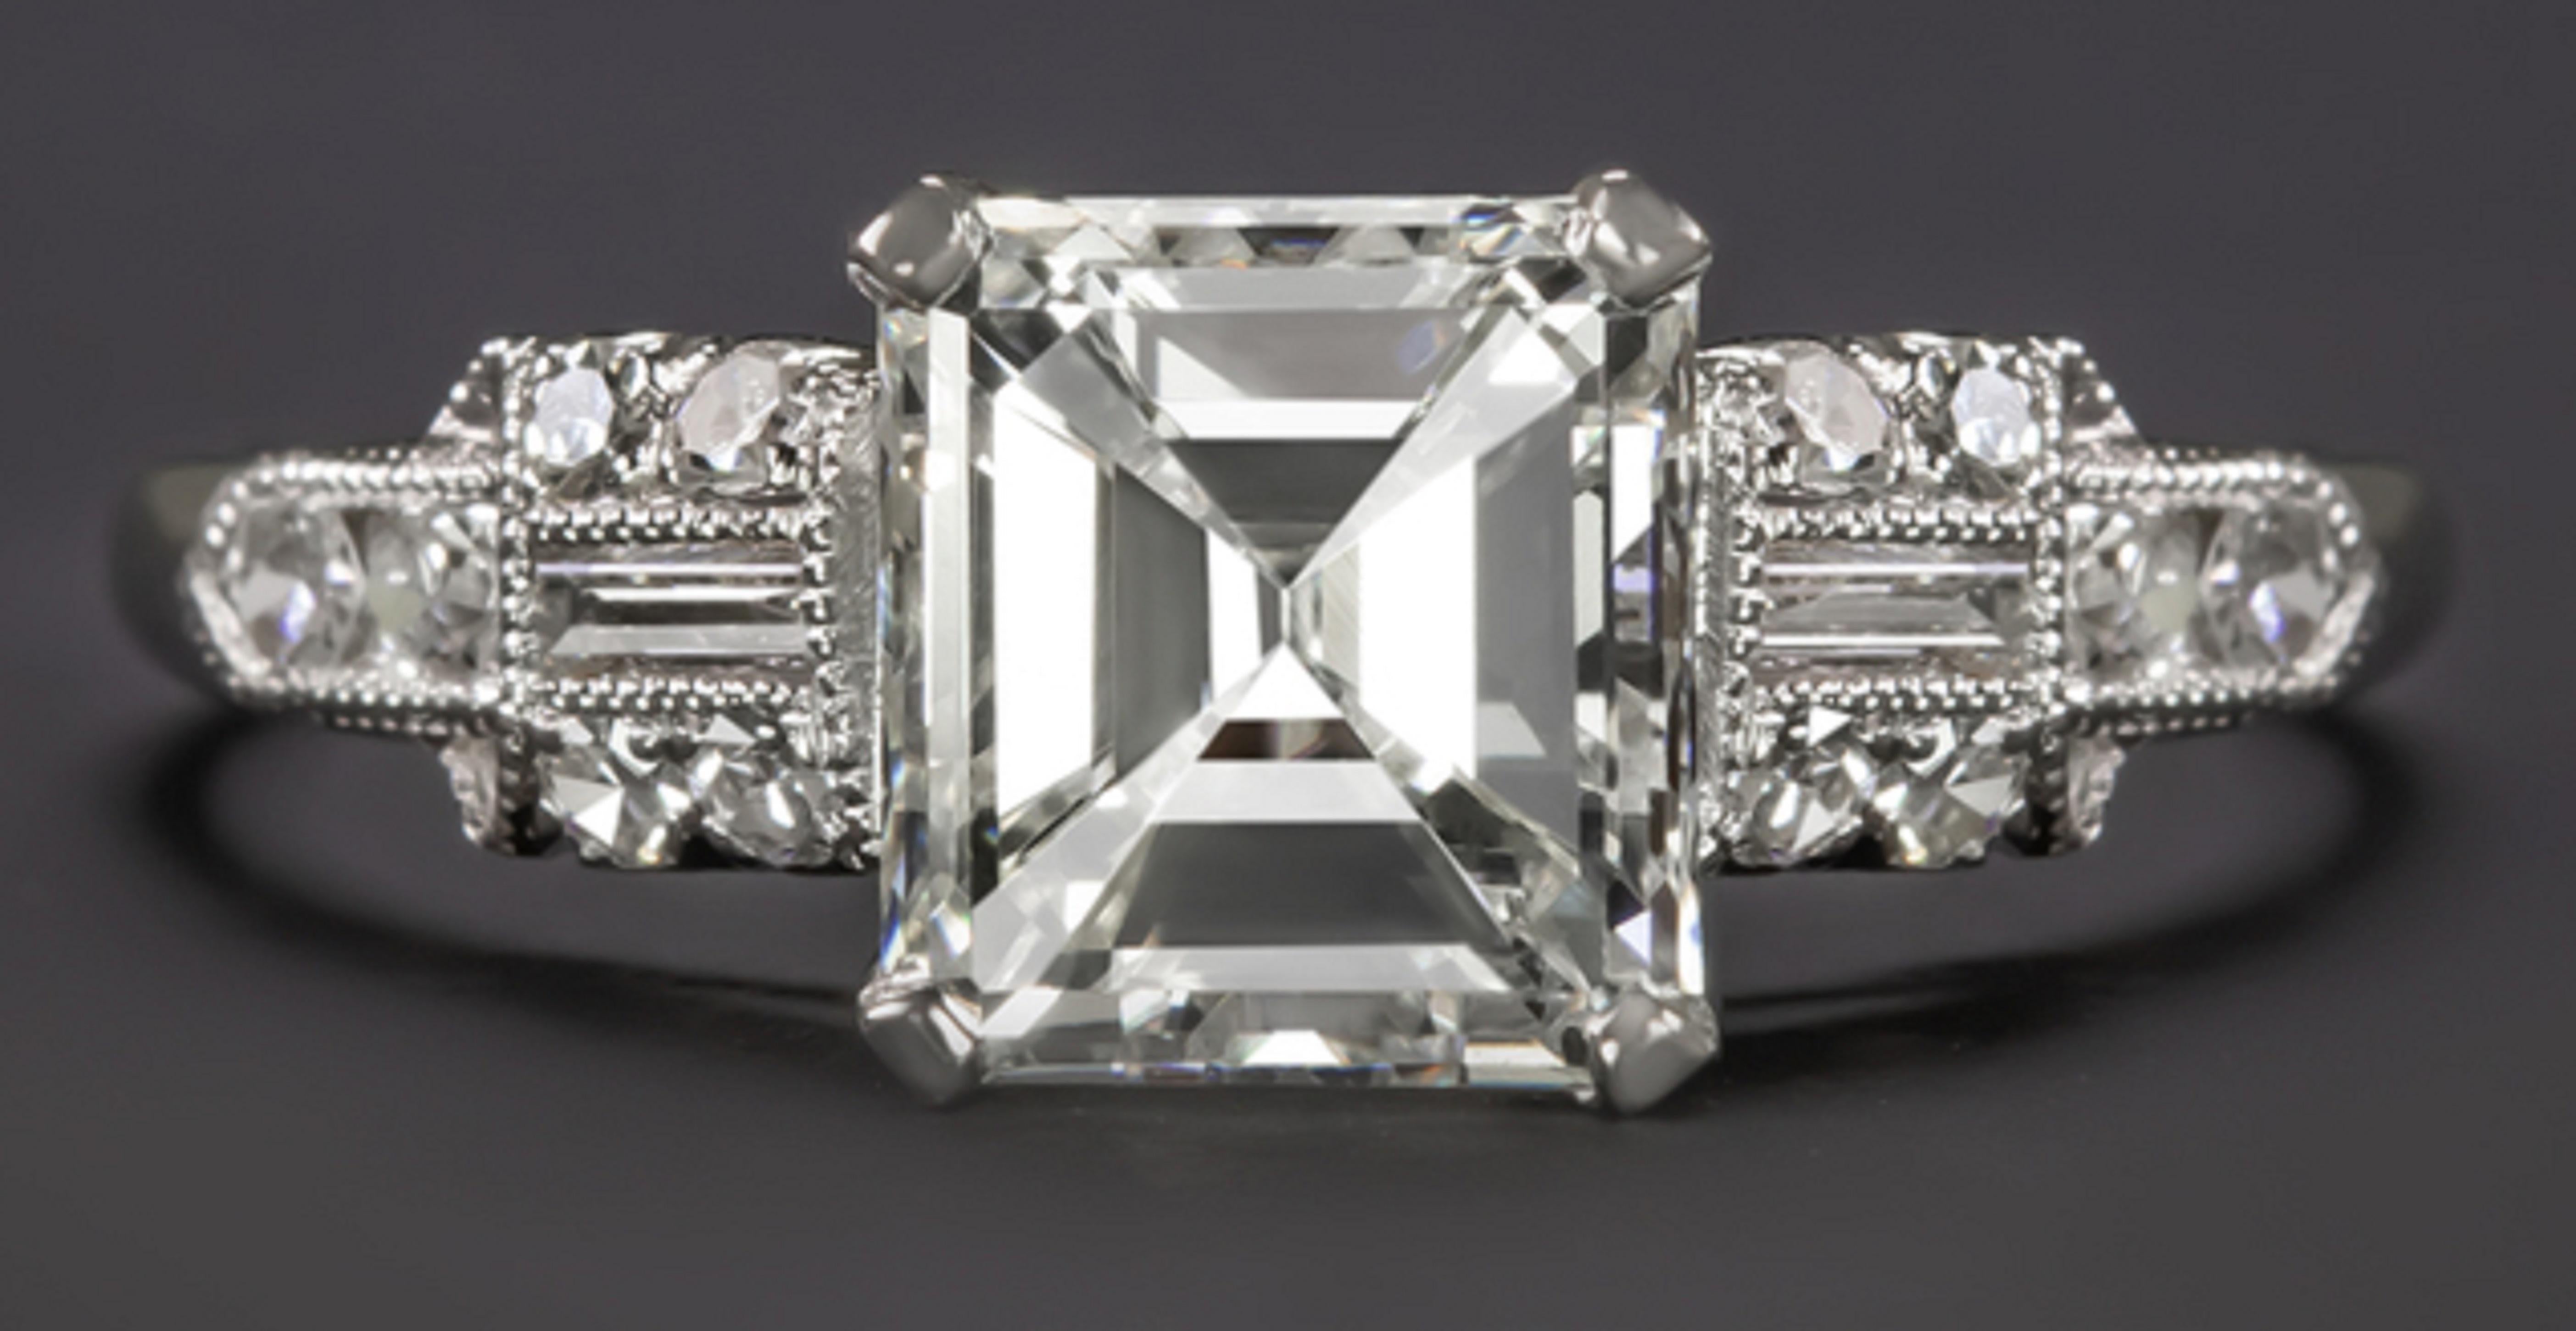 This stunning vintage style engagement ring features a vibrant GIA certified emerald cut diamond complemented by an elegantly designed diamond studded setting. The main stone is a very white white and completely eye clean 1.30ct center diamond an